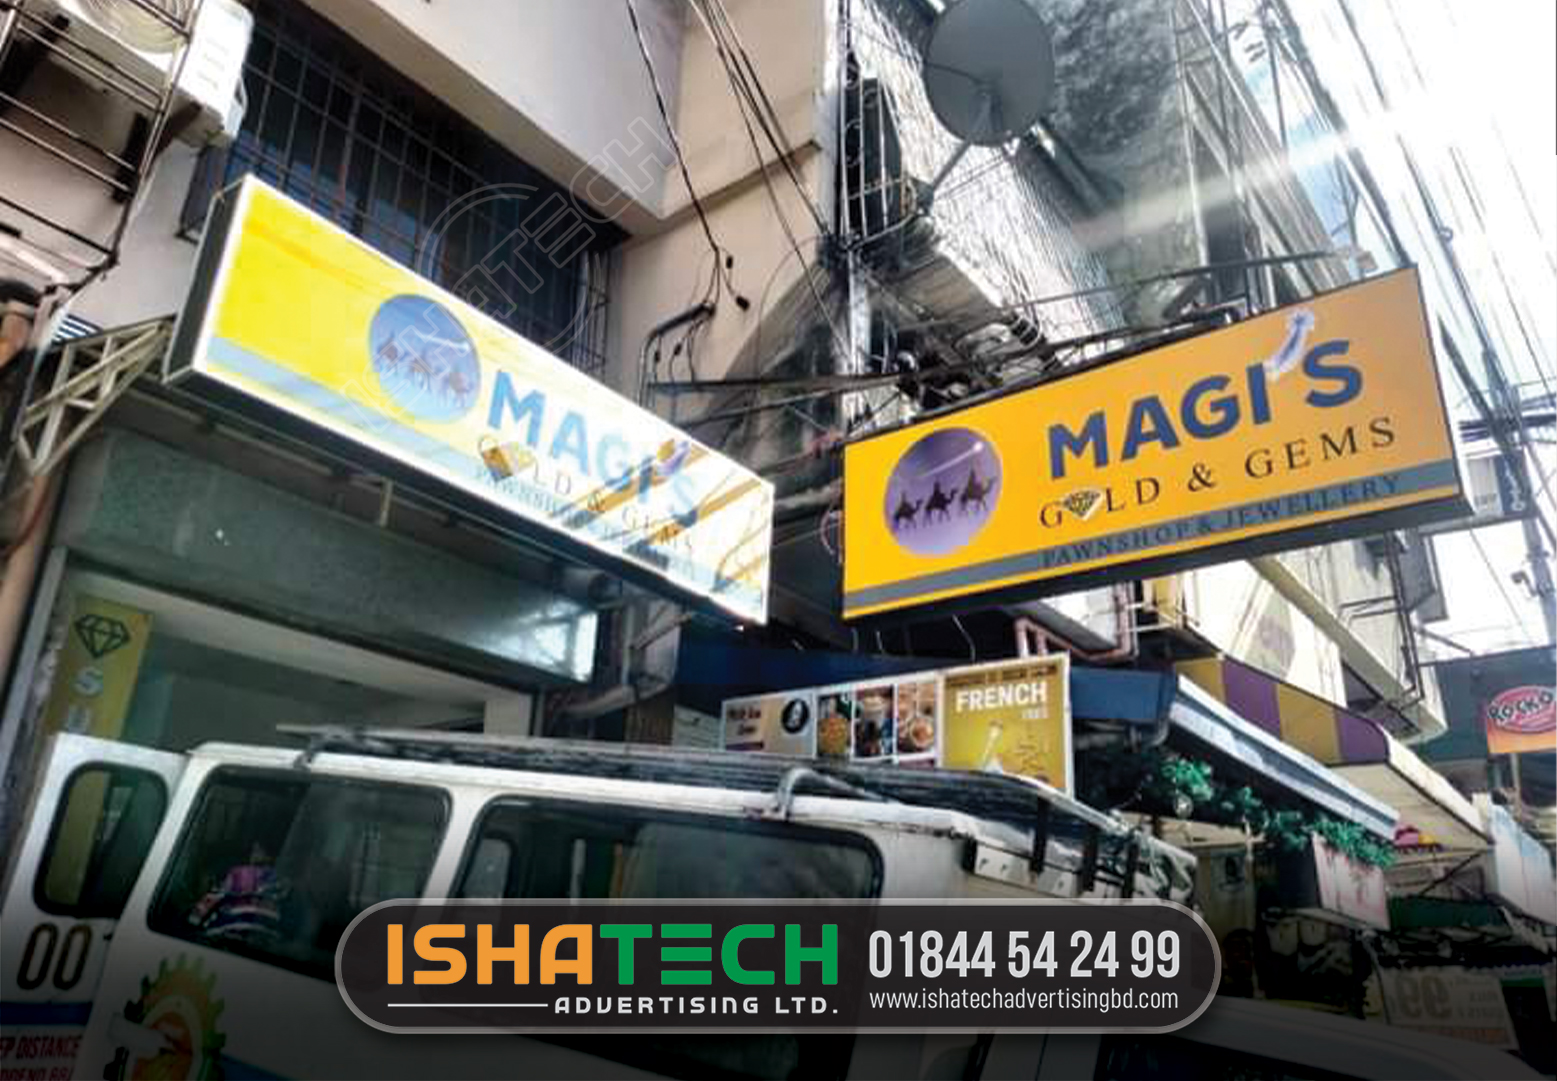 Best aluminium lighting shop signboard and billboard maker and manufacturer company in bangladesh. Aluminium lighting shop signboard and billboard maker and manufacturer company in bangladesh price. ishatech advertising ltd. led sign board price in bangladesh. led display board suppliers in bangladesh. signboard bd. pvc sign board price in bangladesh. led sign bd. ACP Sign Board, ACP Signage in Maker and Supplier in Dhaka Bangladesh. ACP Sign Board Design & Manufacturing In BD. ACP Signboard for Construction. ACP Board Latest Price from Manufacturers, Suppliers in Chittagong Bangladesh. Advantages of Using ACP Sheets in Signage.